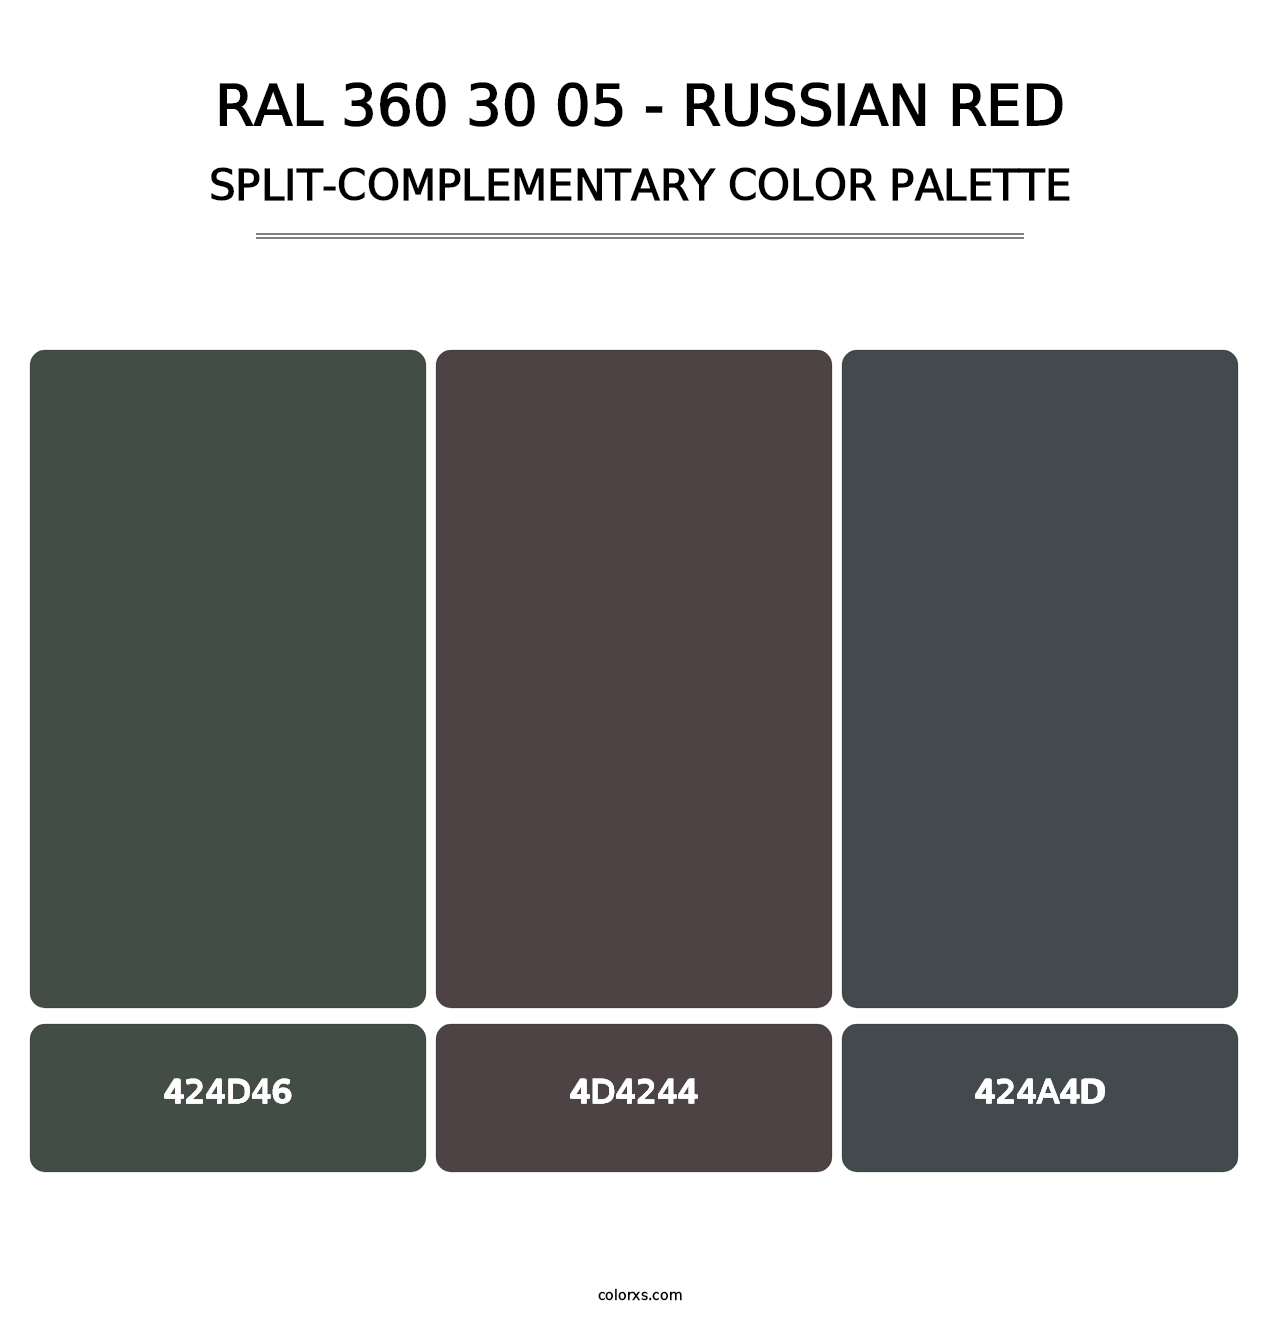 RAL 360 30 05 - Russian Red - Split-Complementary Color Palette